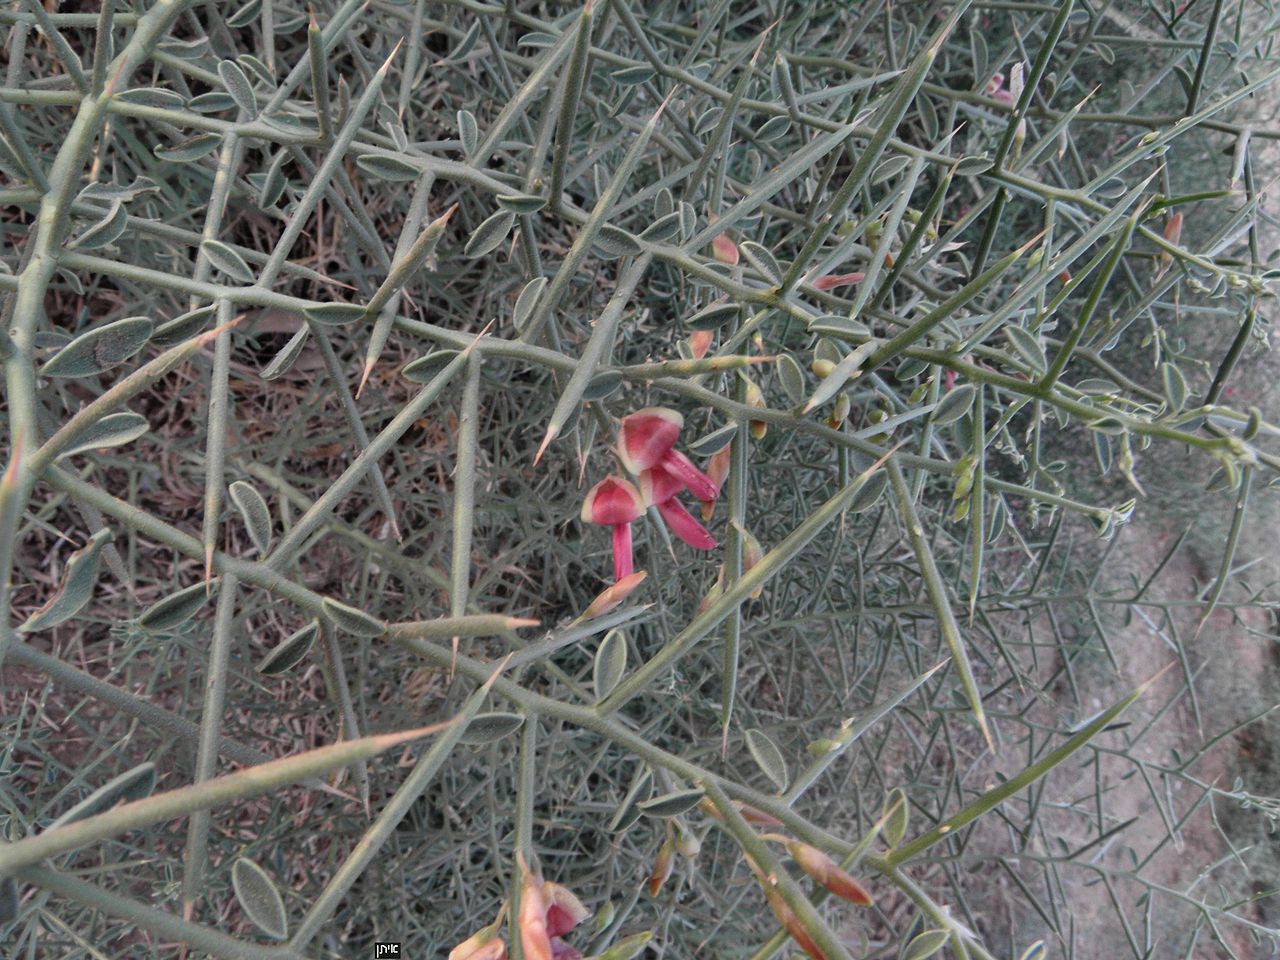 Reddish-pink flowers, twigs, and spines of camelthorn